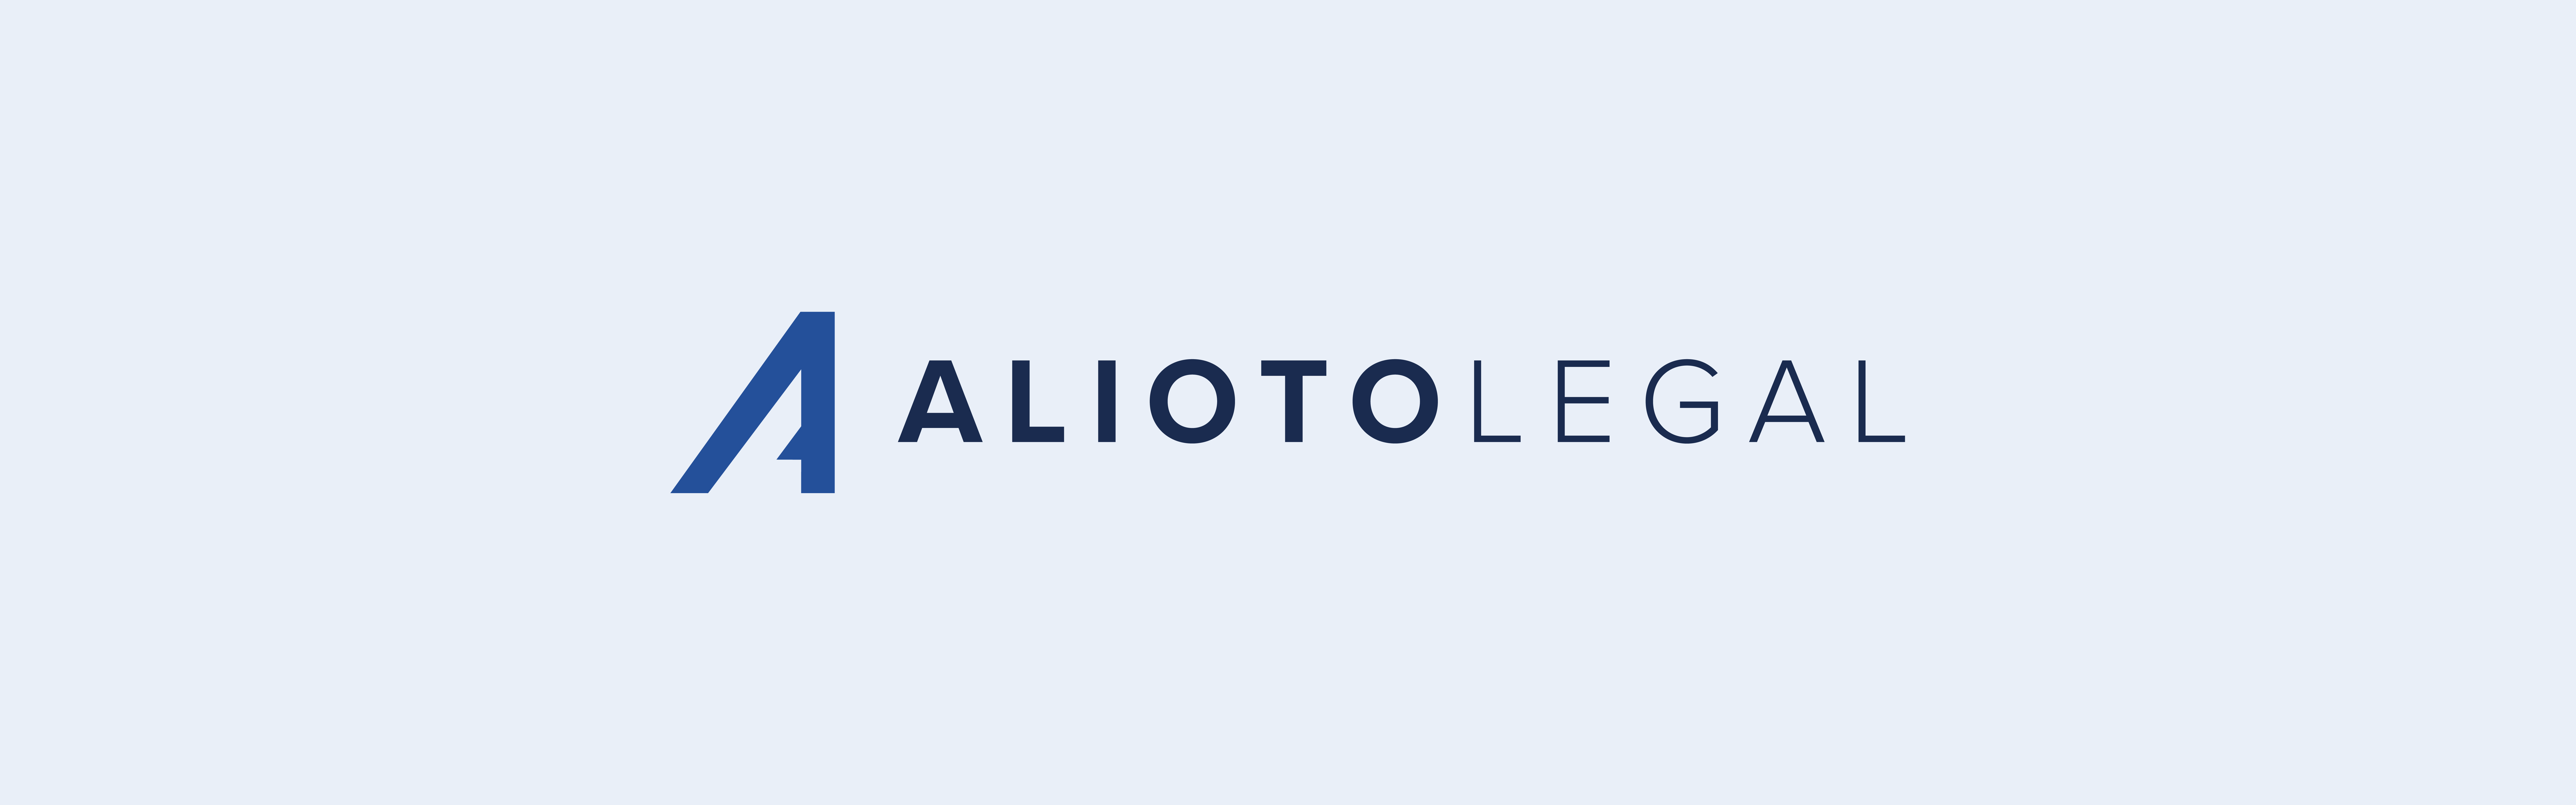 The image displays the text "Alioto Legal" with a stylized "a" against a pale blue background.